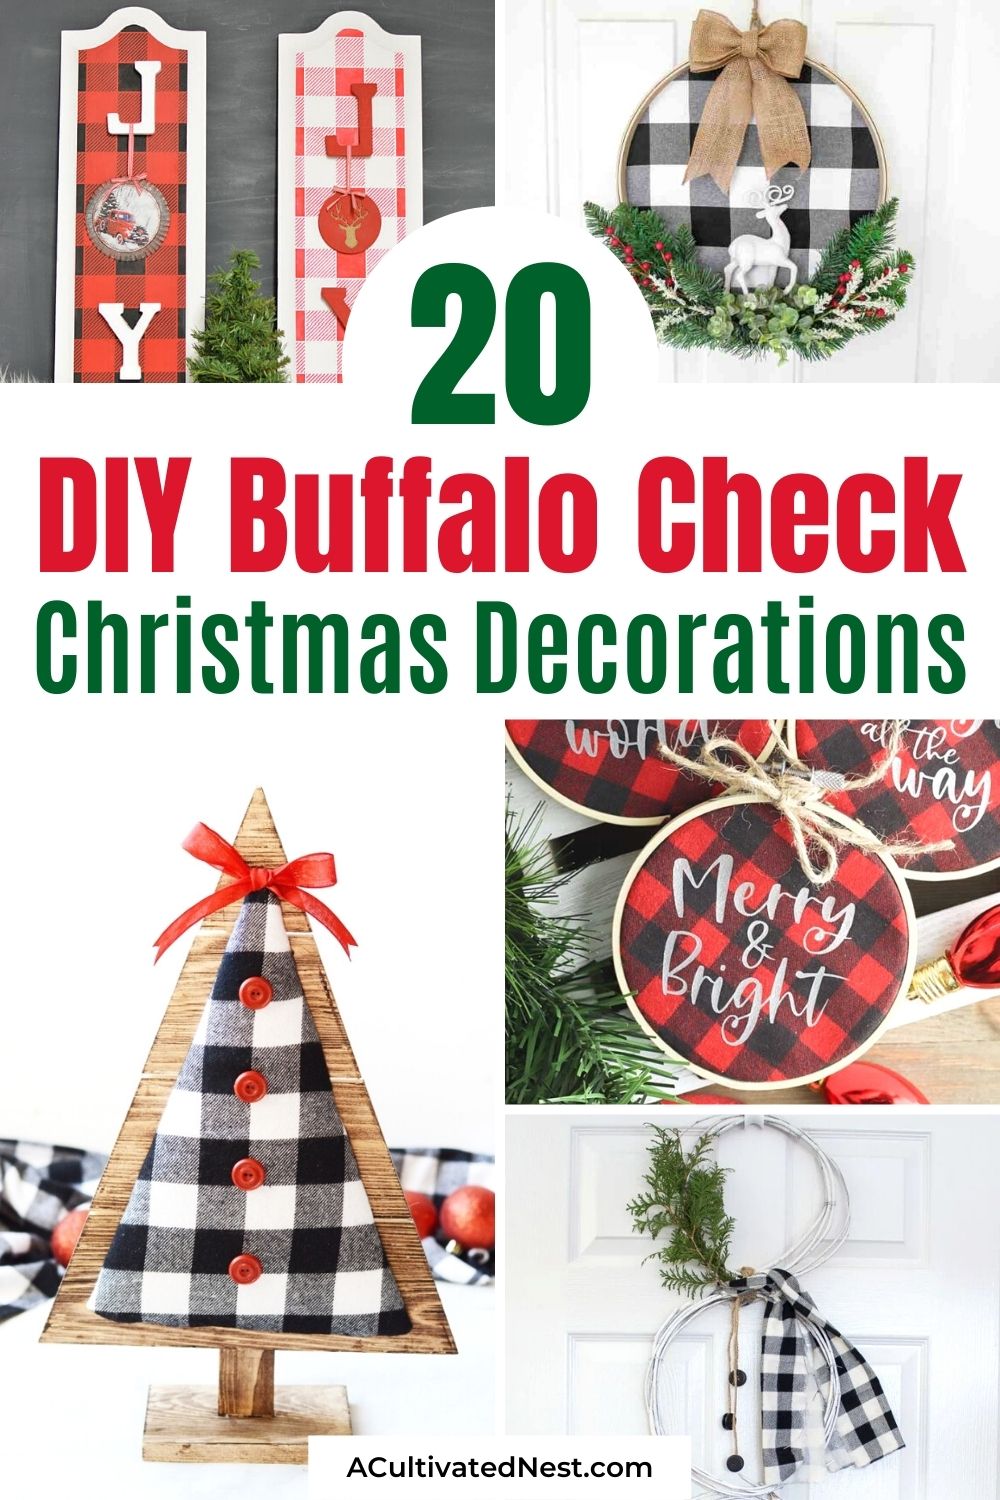 20 Gorgeous DIY Buffalo Check Christmas Decorations- If you like farmhouse style décor, incorporate it into your home this Christmas with these gorgeous DIY buffalo check Christmas decorations! | buffalo plaid Christmas DIYs, #ChristmasDIY #ChristmasDecorations #buffaloCheckDecor #buffaloPlaidDecor #ACultivatedNest